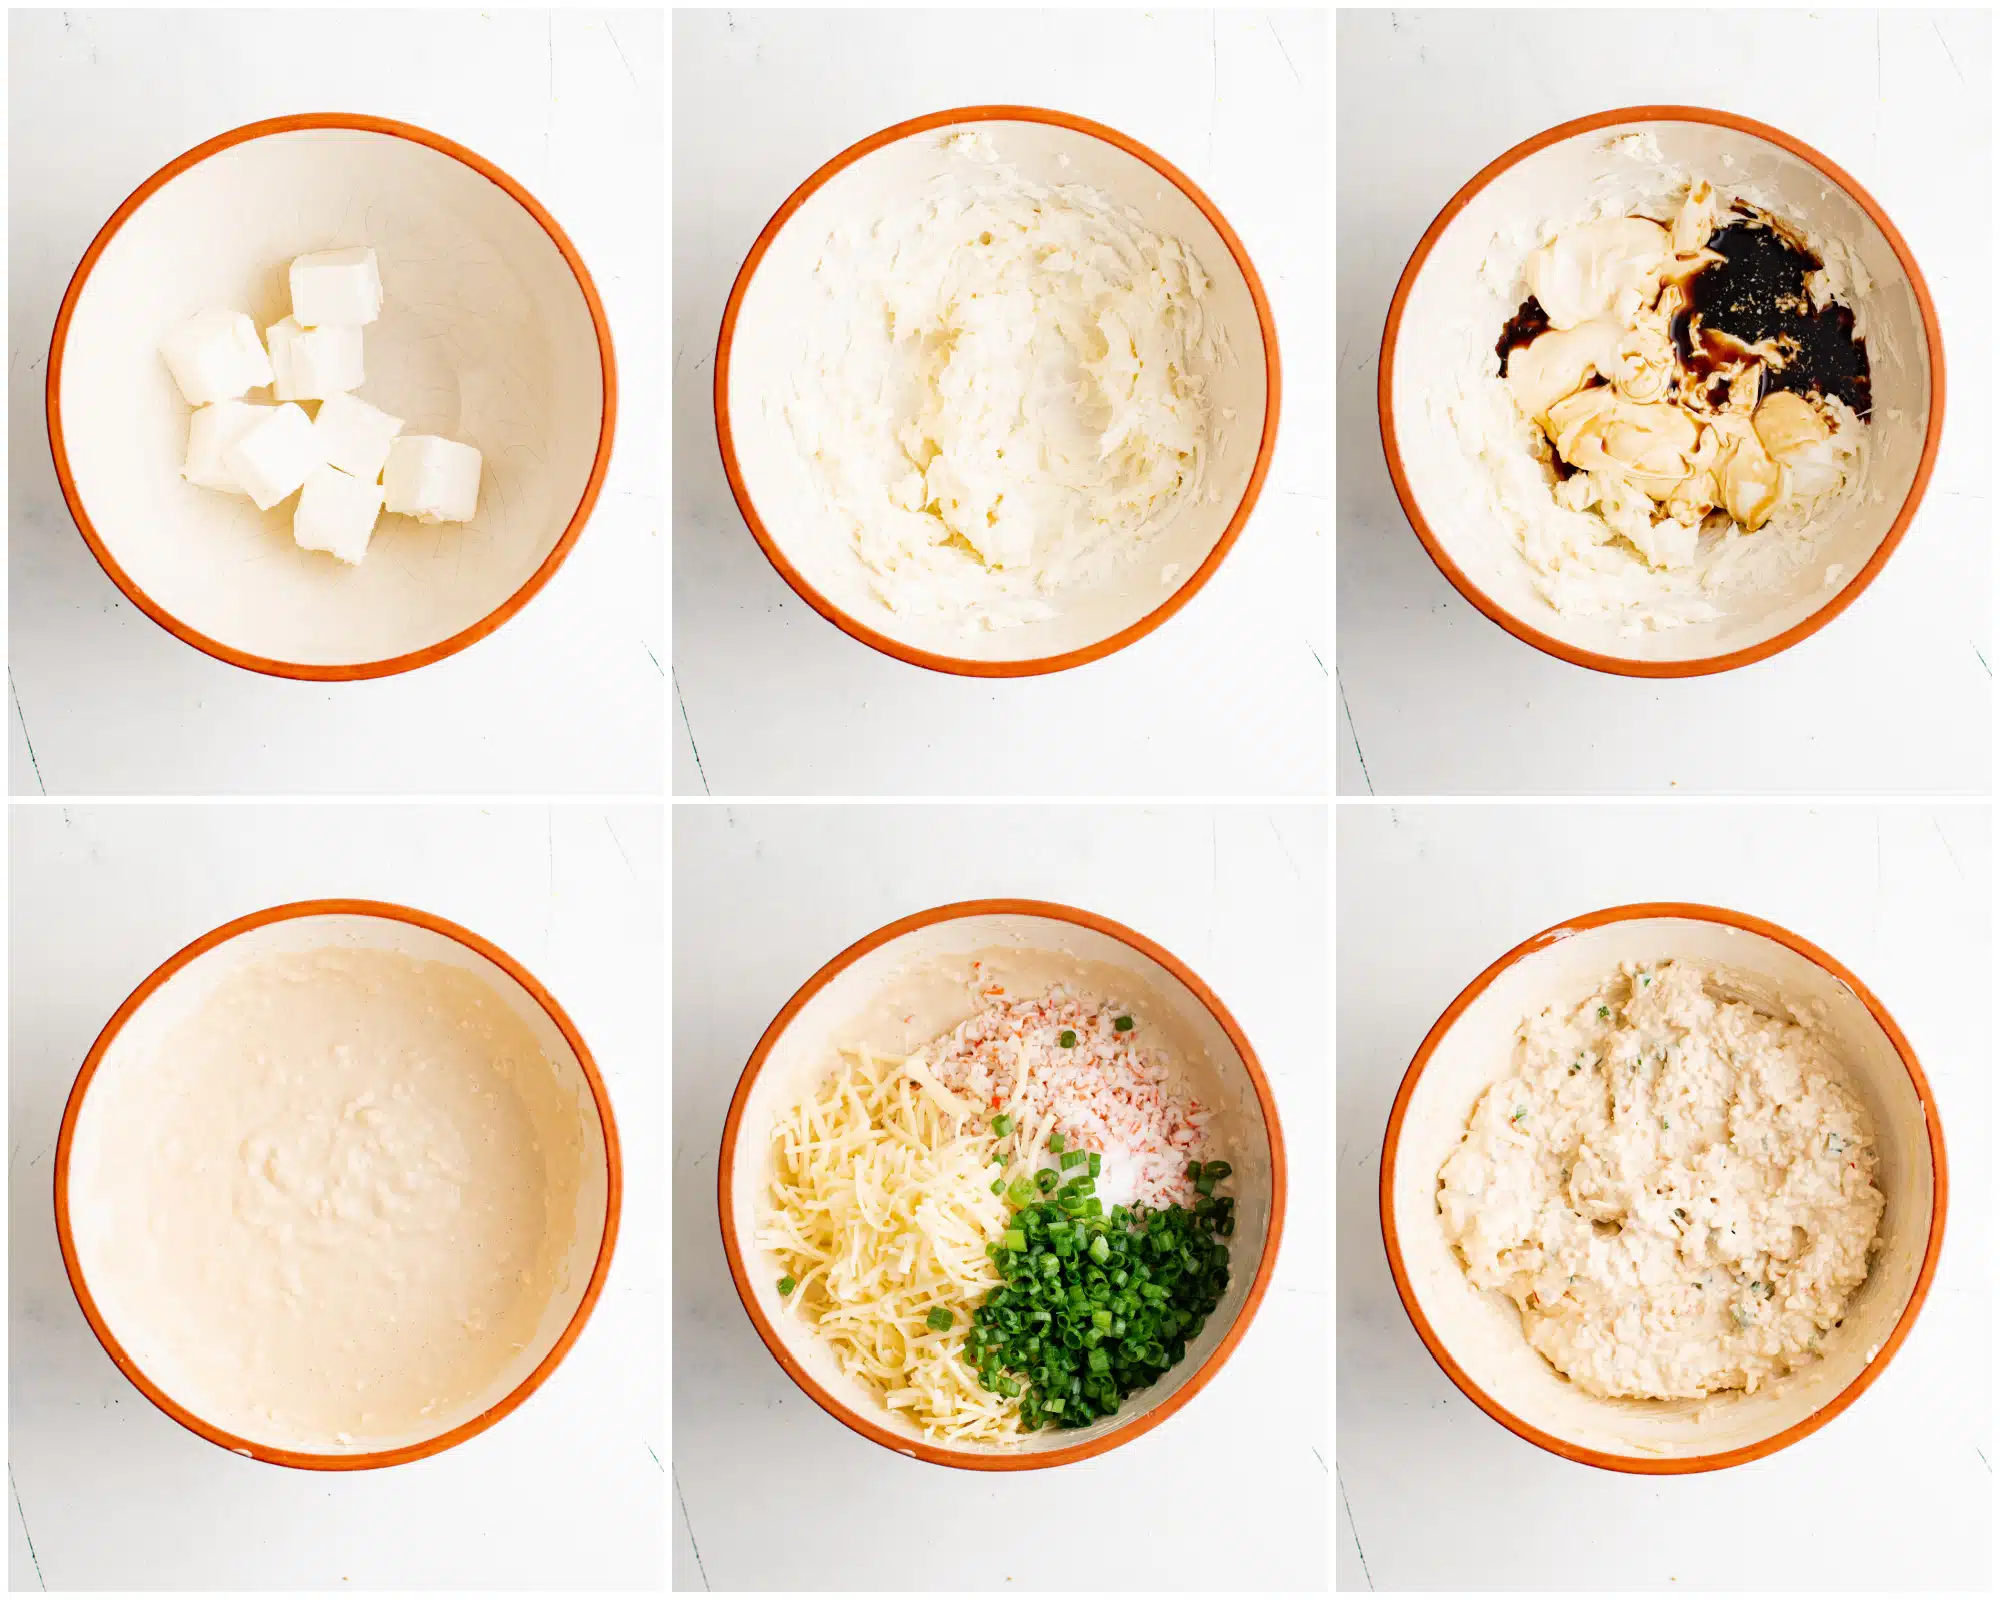 Sim images in a collage: The first image shows cubes of cream cheese in a bowl; the second image shows a white bowl with whipped cream cheese; the third image is of a bowl filled with whipped cream cheese, sour cream, mayonnaise, soy sauce, garlic and sugar; the fourth image shows the mixing bowl filled with cream cheese in a large bowl mixed with the sour cream, mayonnaise, soy sauce, garlic and sugar until fully combined; the fifth image shows crab, shredded cheese, and green onion added to the mixing bowl; the last image shows all of the ingredients for crab rangoon dip mixed together in a large mixing bowl.